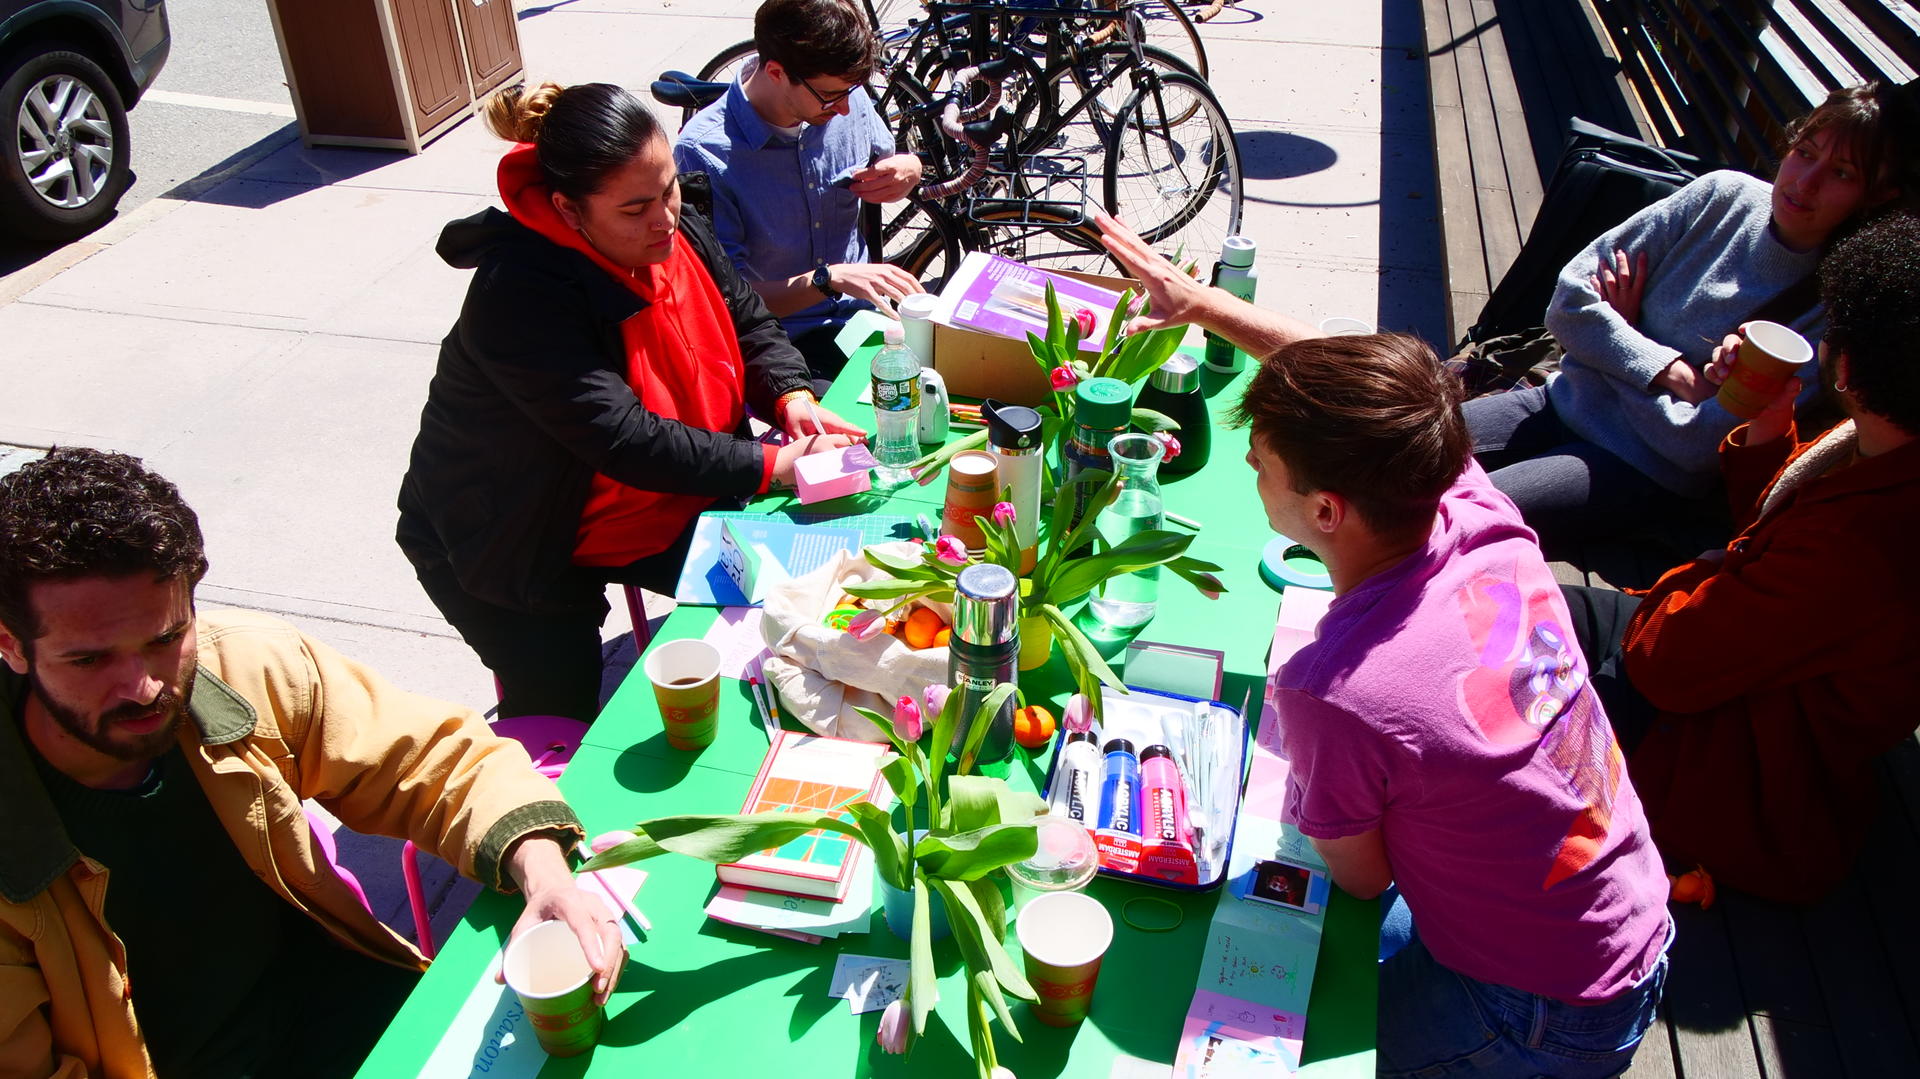 6 students gather around a green table covered in flowers, drinks, paint, and a books of drawings and photographs.  